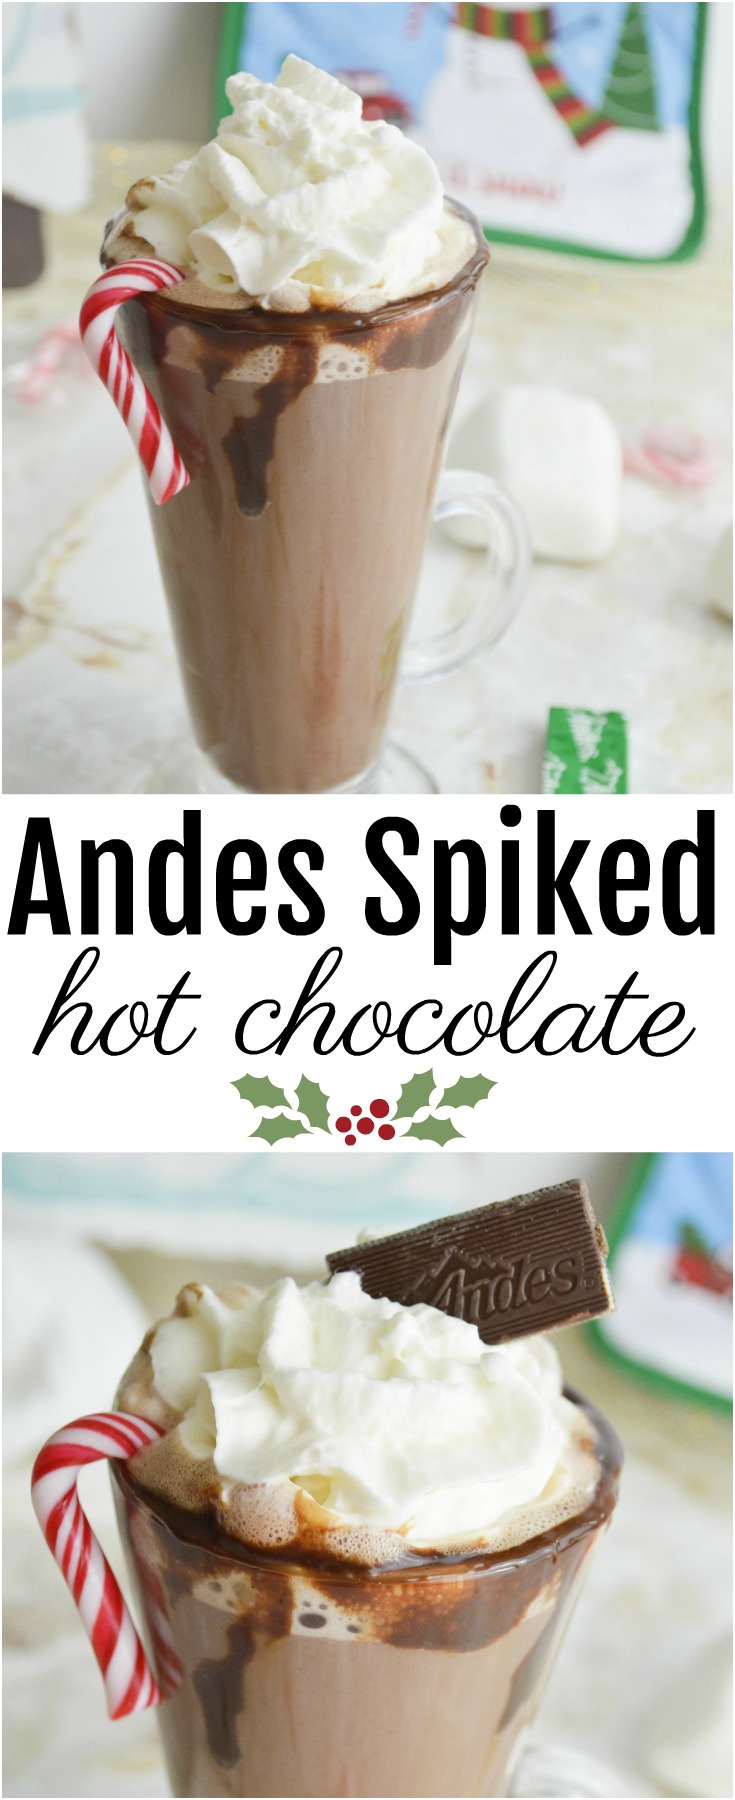 Andes Spiked Hot Chocolate